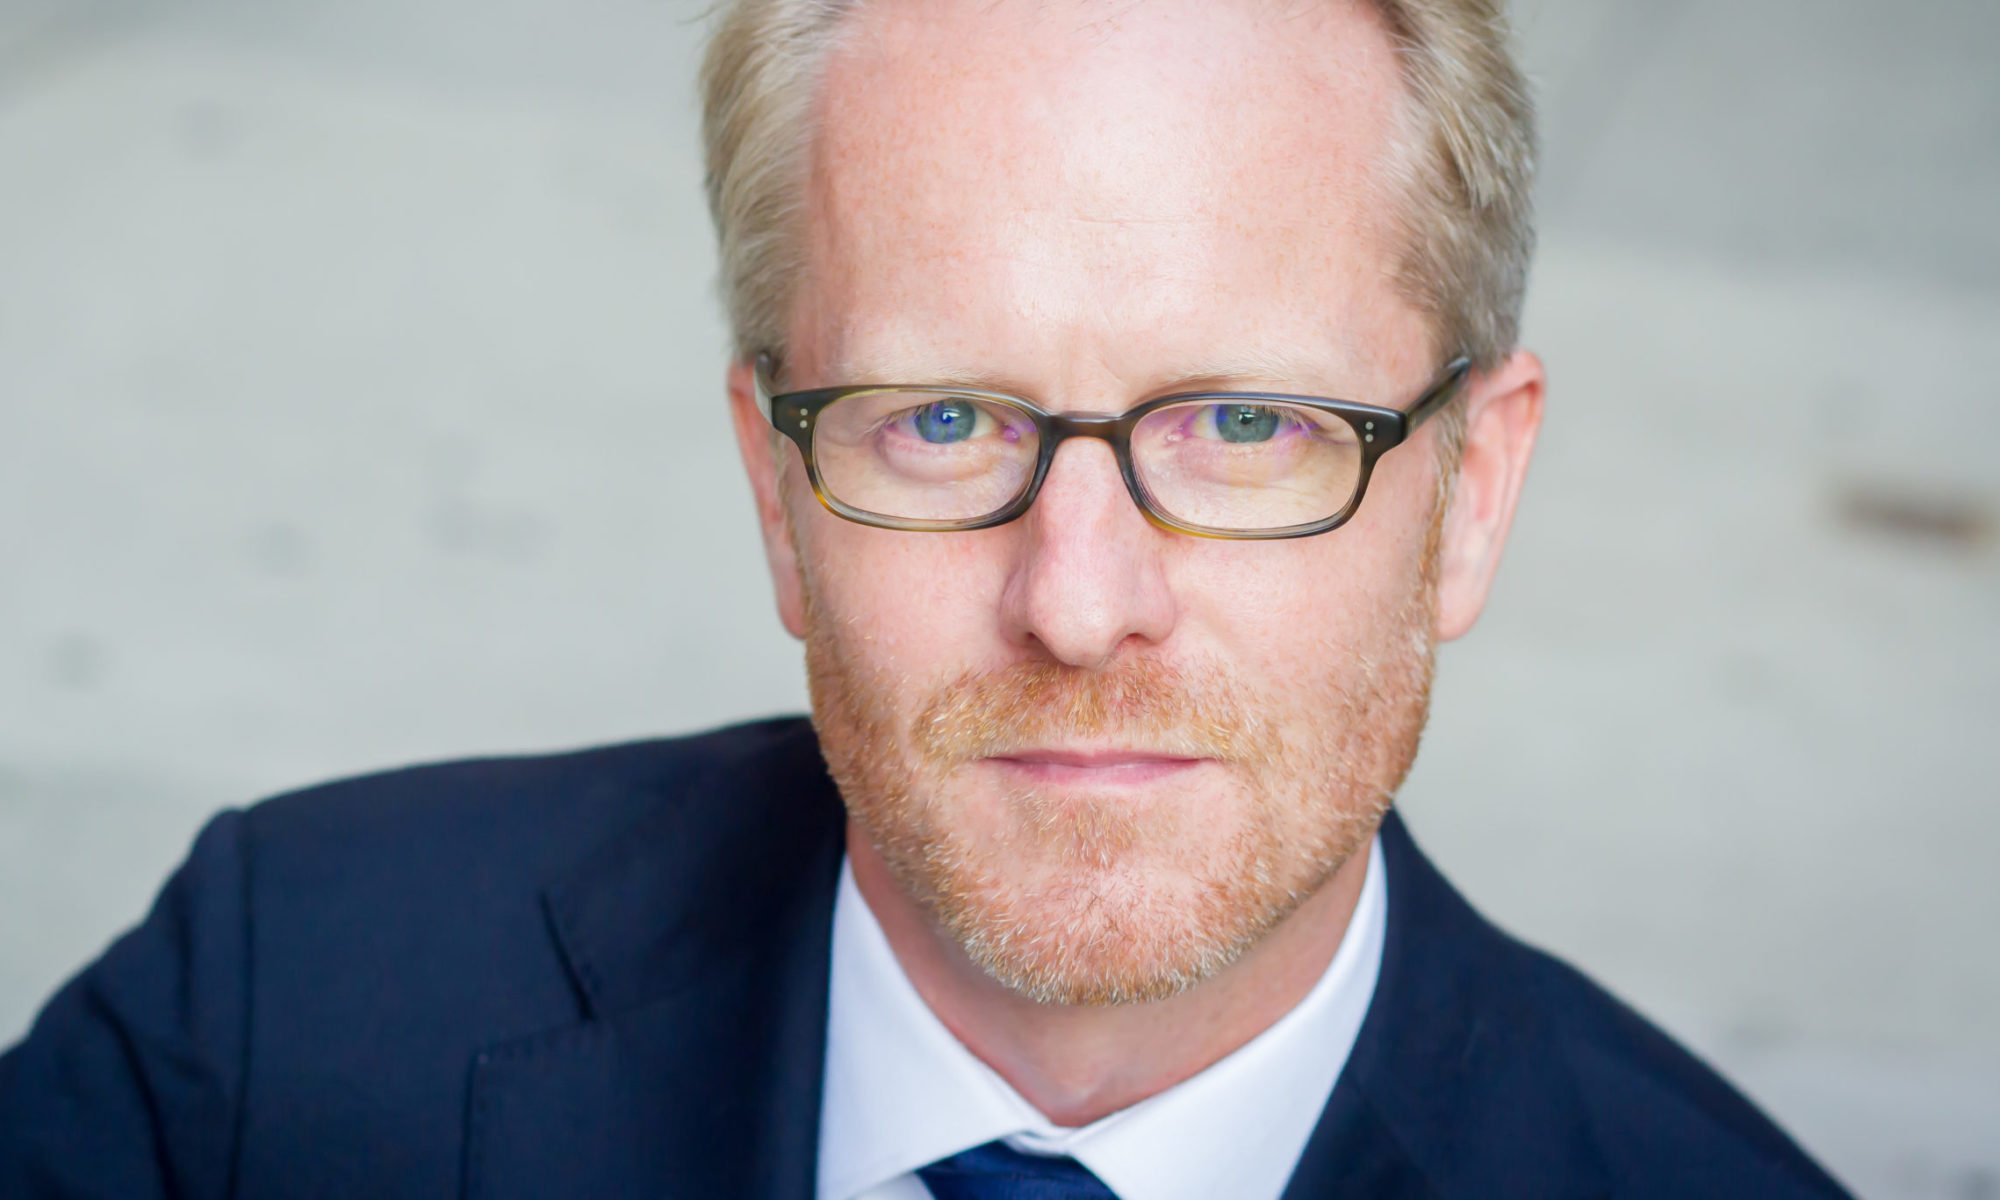 Headshot of Doug, a man with blonde hair, glasses, and a light beard, wearing a suit.